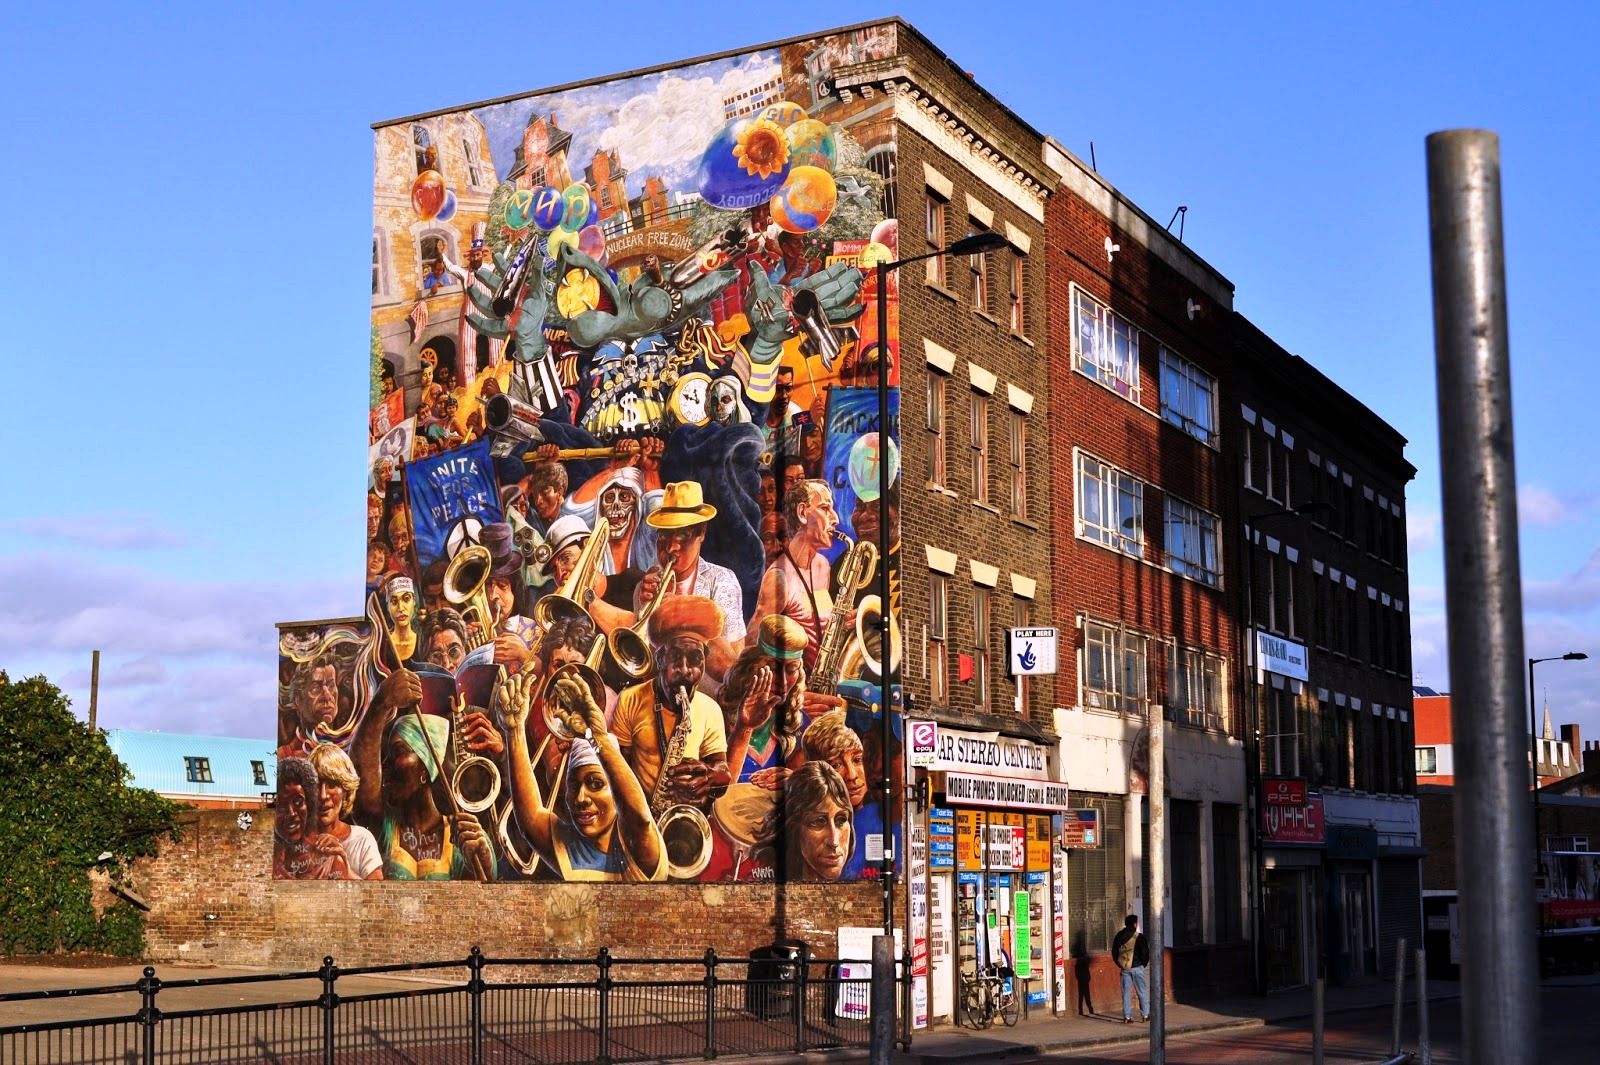 Is Dalston the coolest place in London?